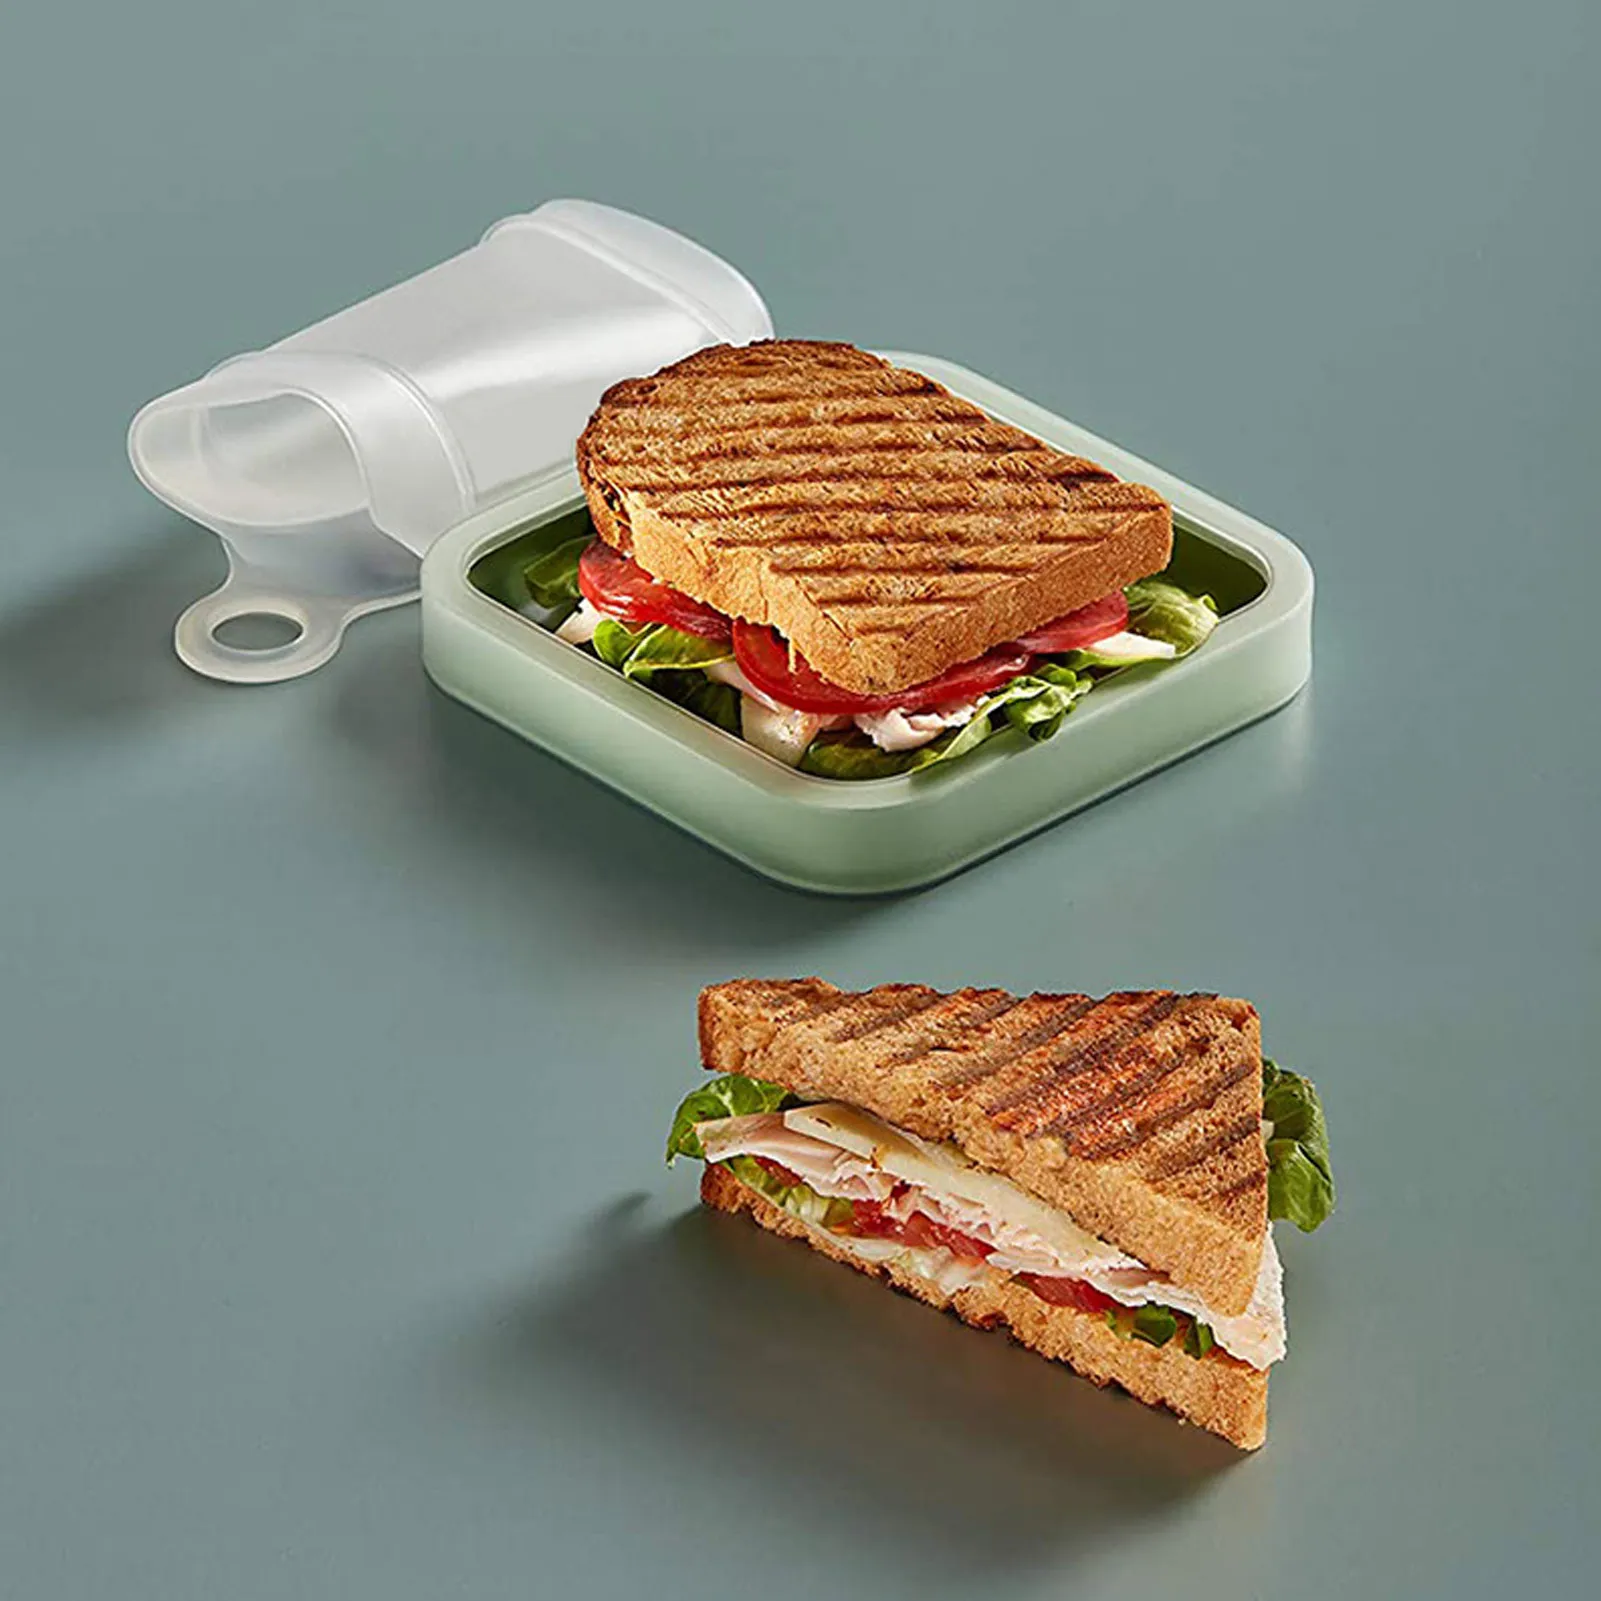 

Sandwich Box Reusable Sandwich Containers Silicone Lunch Box Portable Toast Bento Box For Students And Office Workers Green